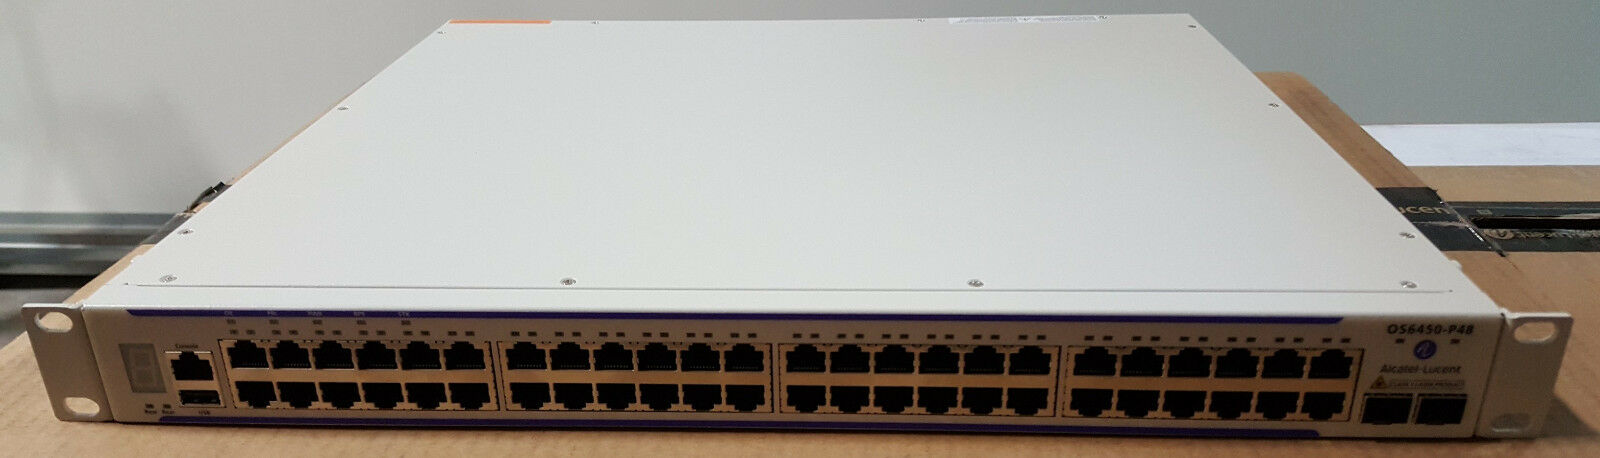 Alcatel-Lucent OS6450-P48 48 Gb PoE Port Managed Switch L3 2xSFP